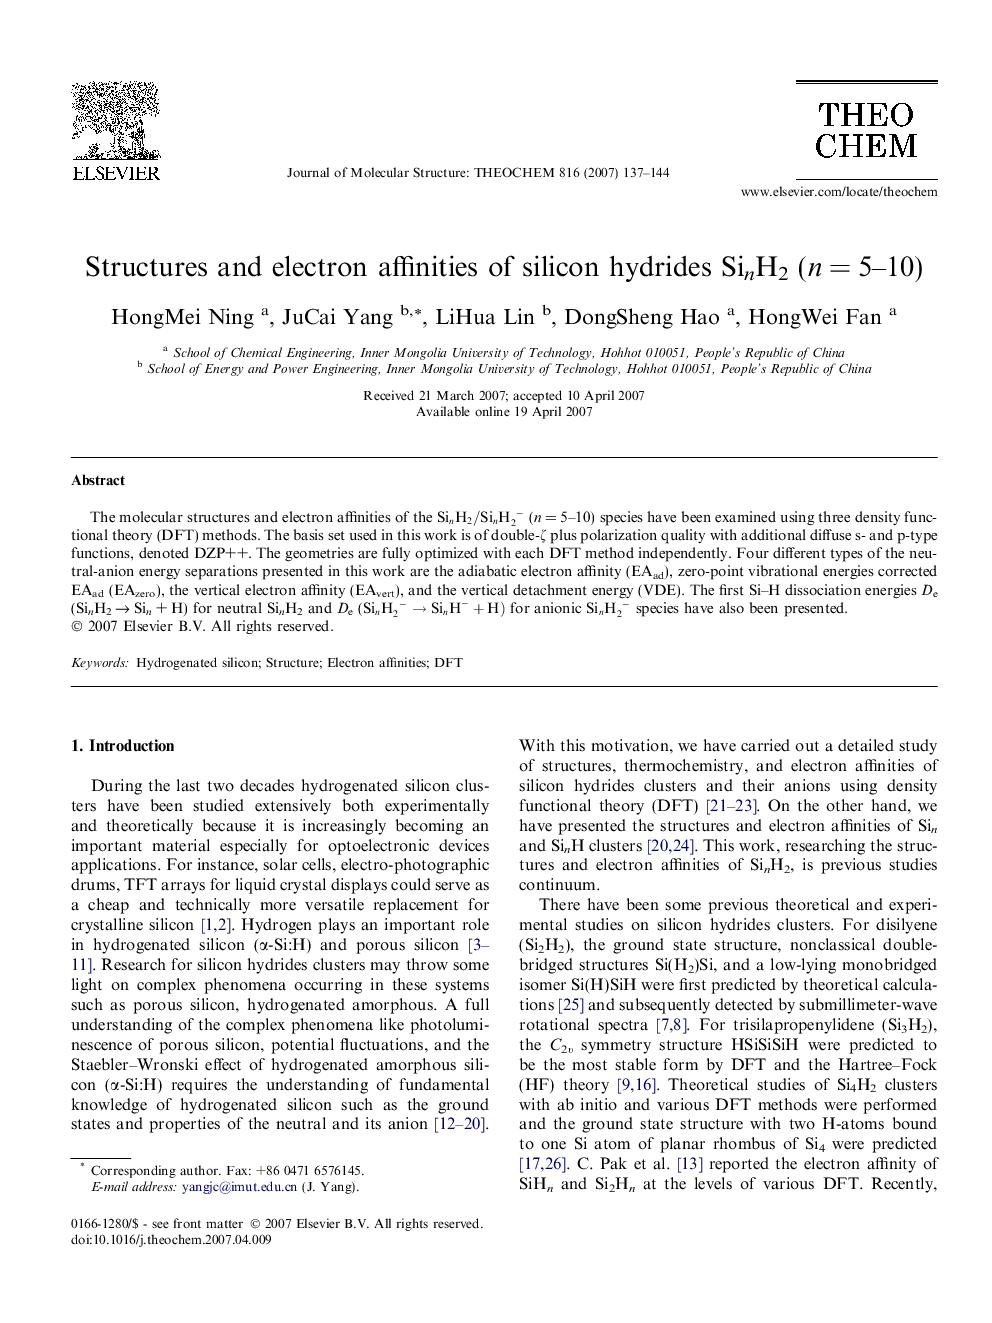 Structures and electron affinities of silicon hydrides SinH2 (nÂ =Â 5-10)